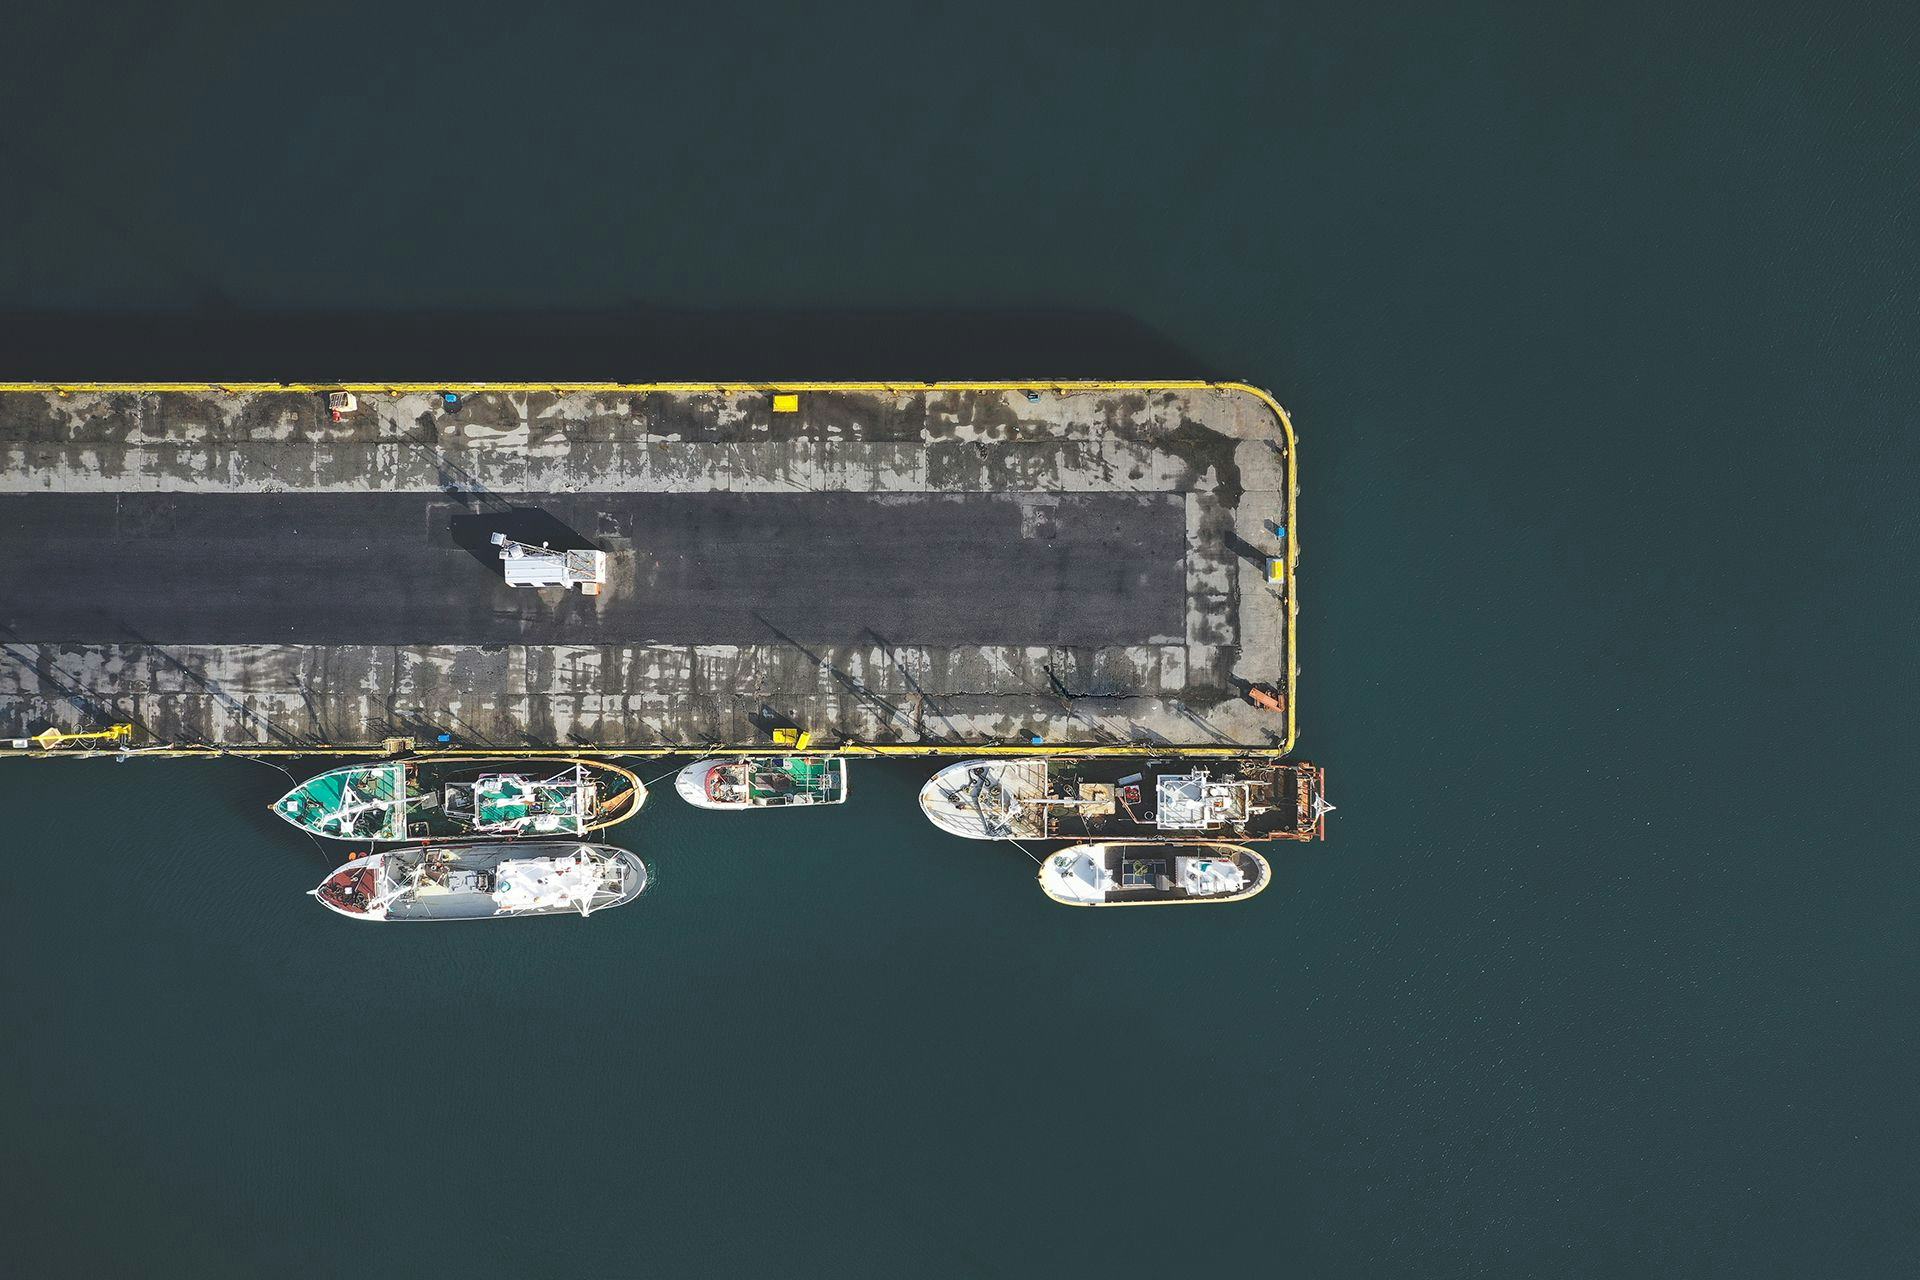 An aerial view of boats docked alongside a pier in a harbor